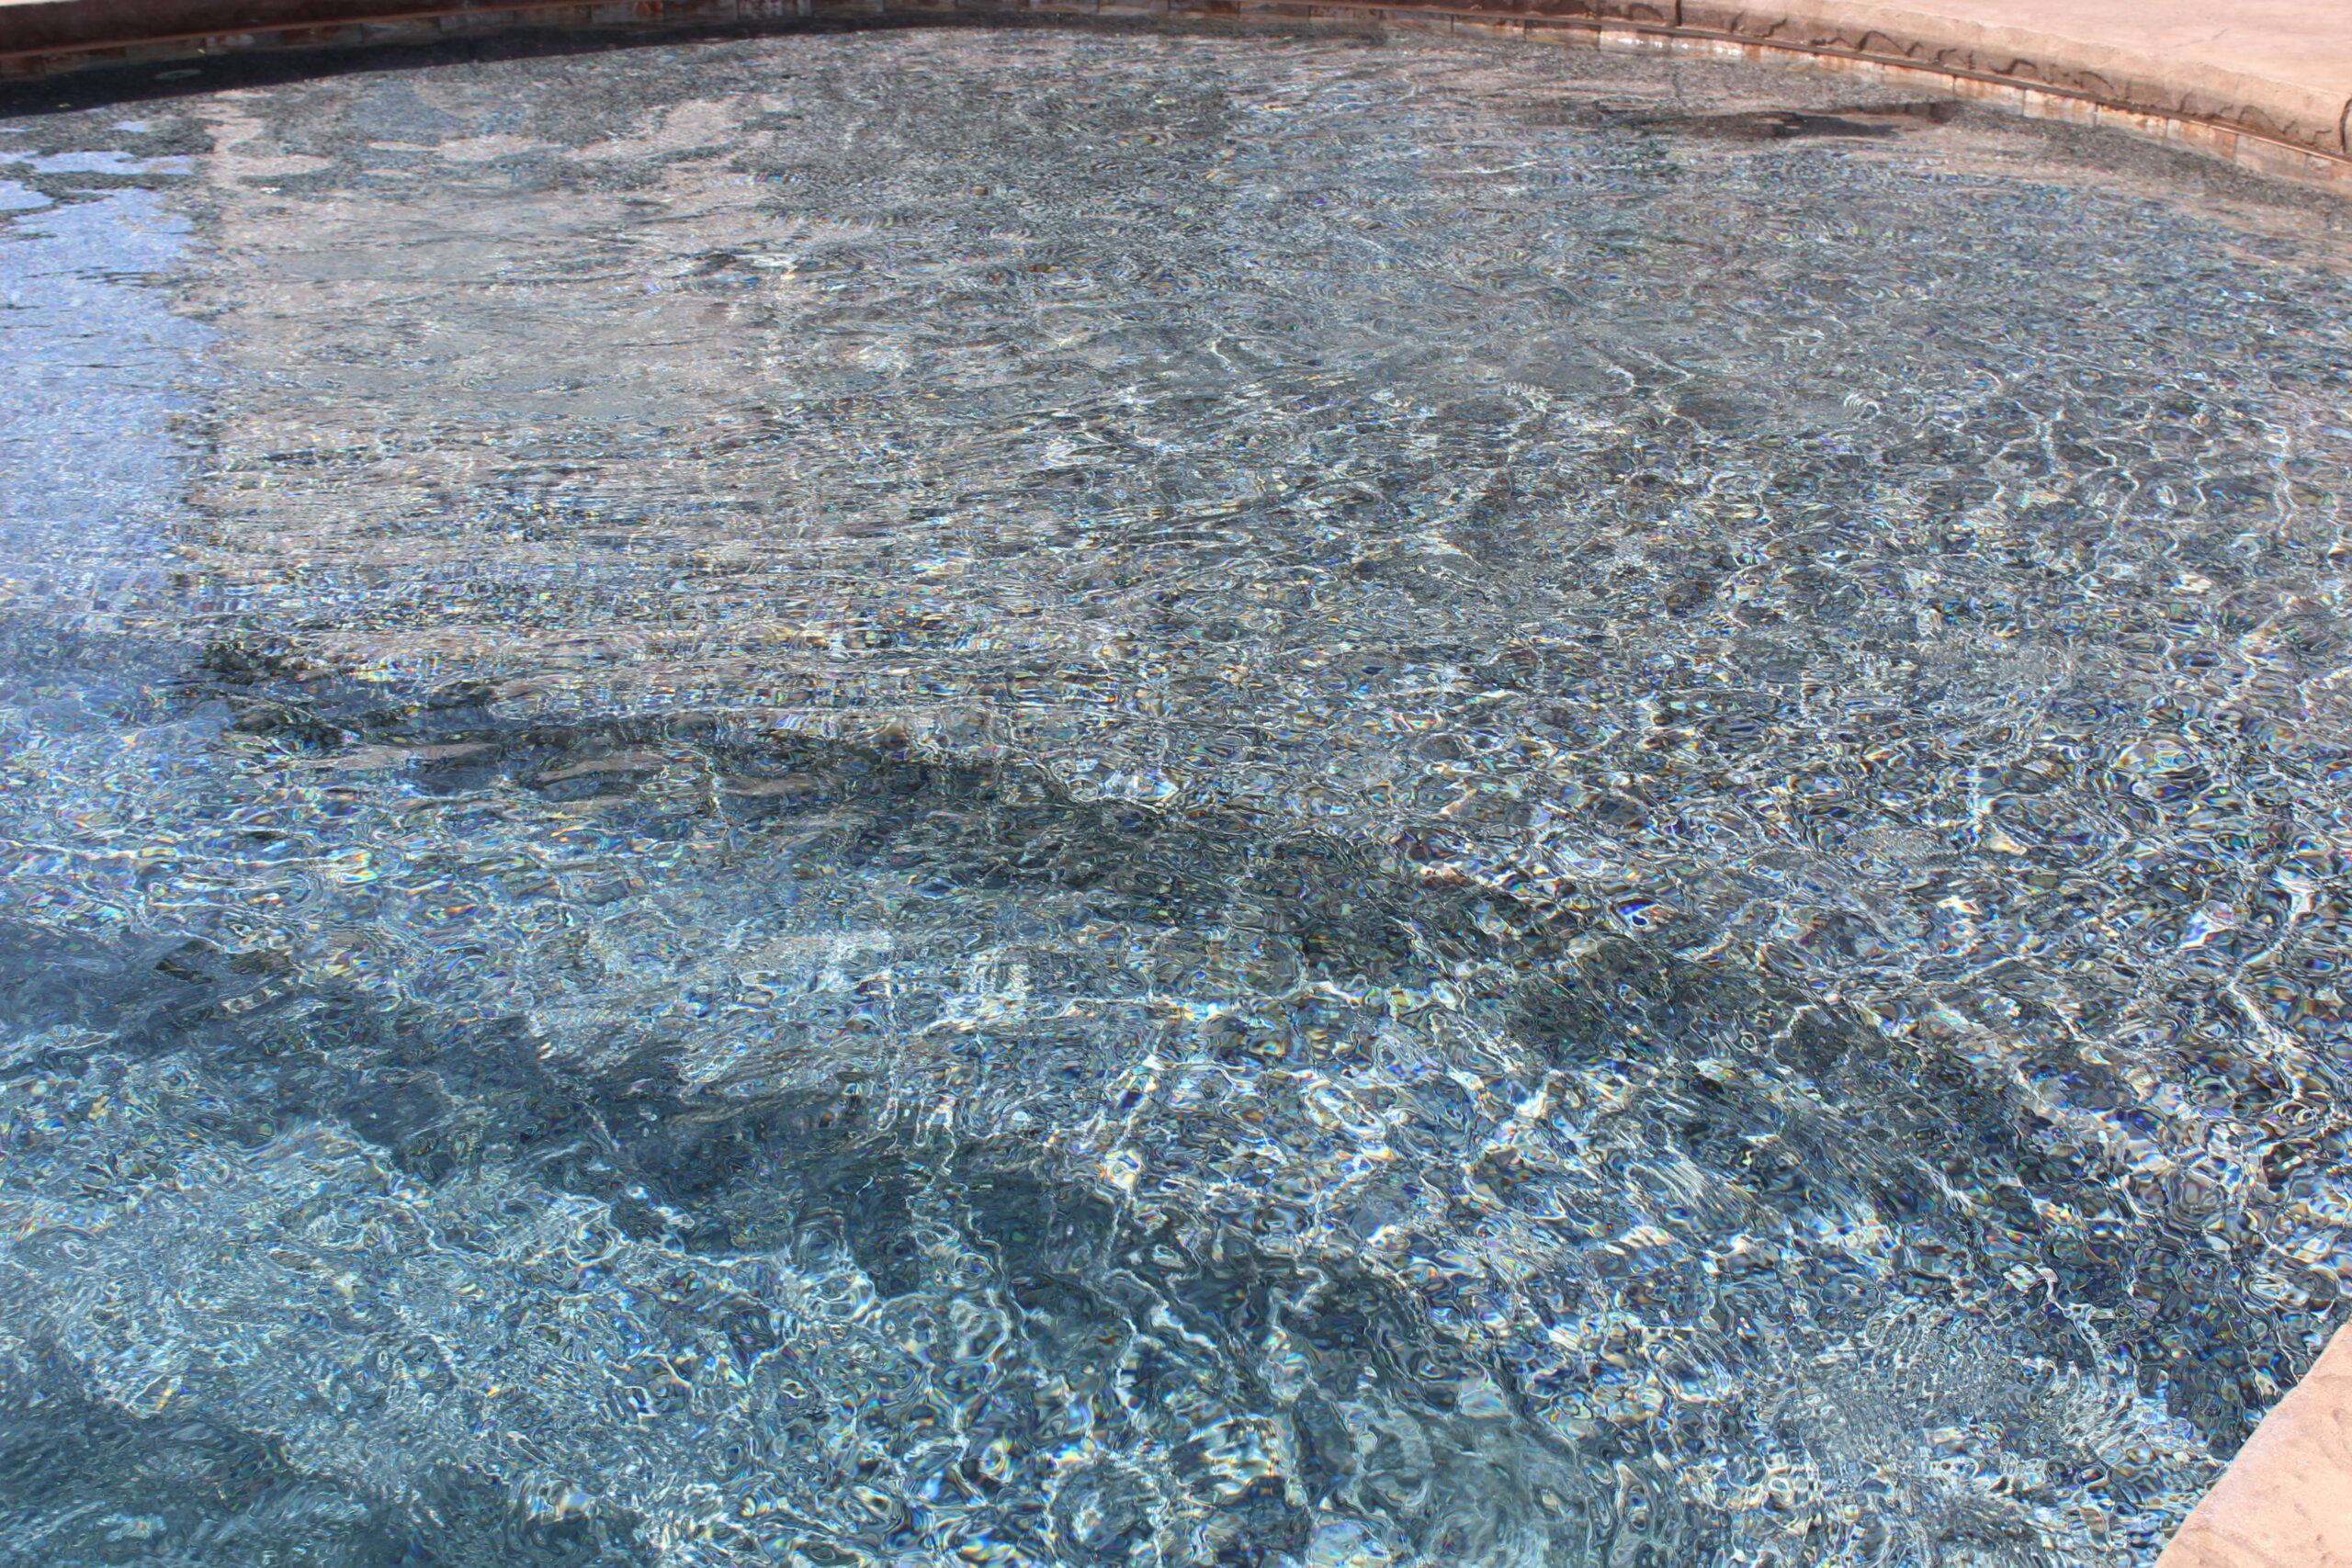 Reviving Your Pool: Reopening After a Long Winter Shutdown